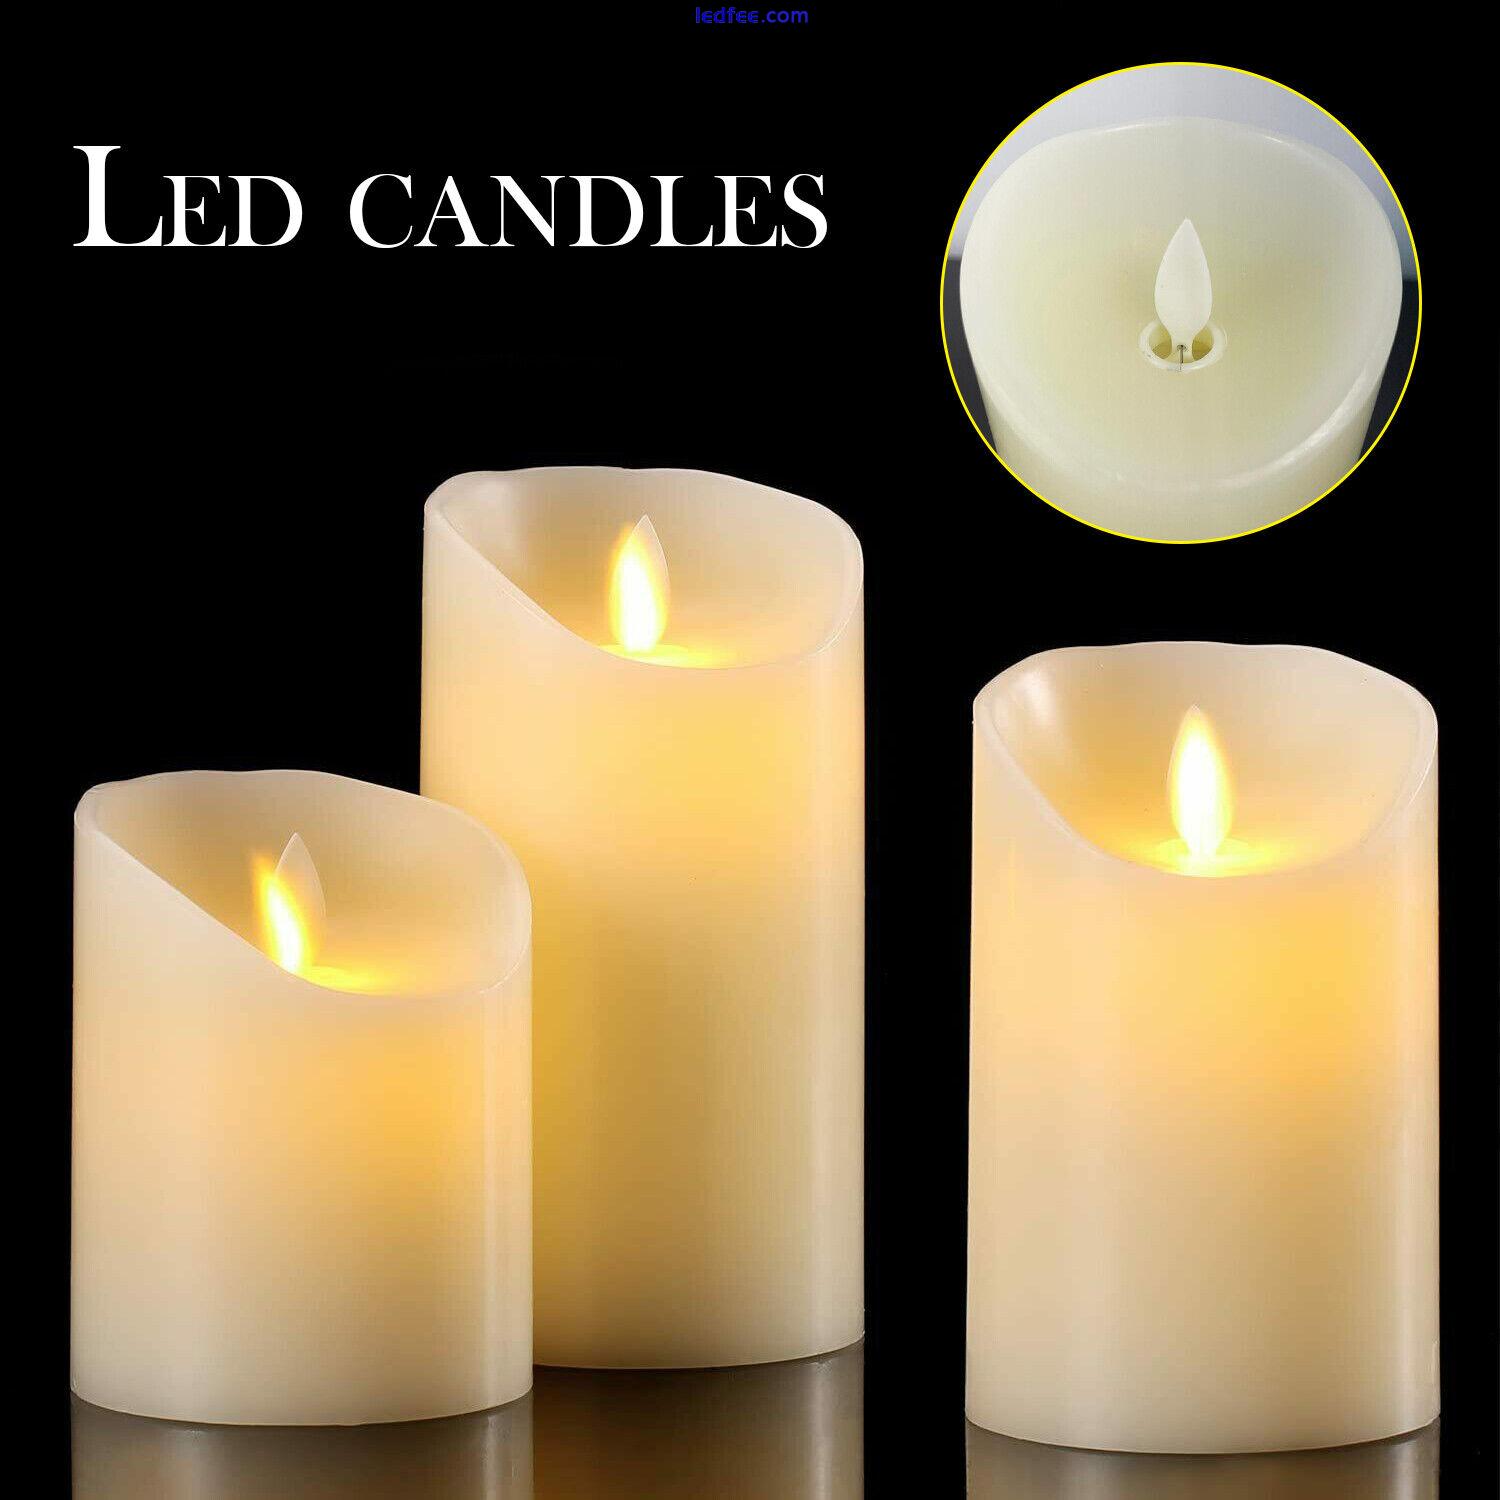 LED Flameless Pillar Candles Flickering Battery Operated With Remote - Set of 3 1 